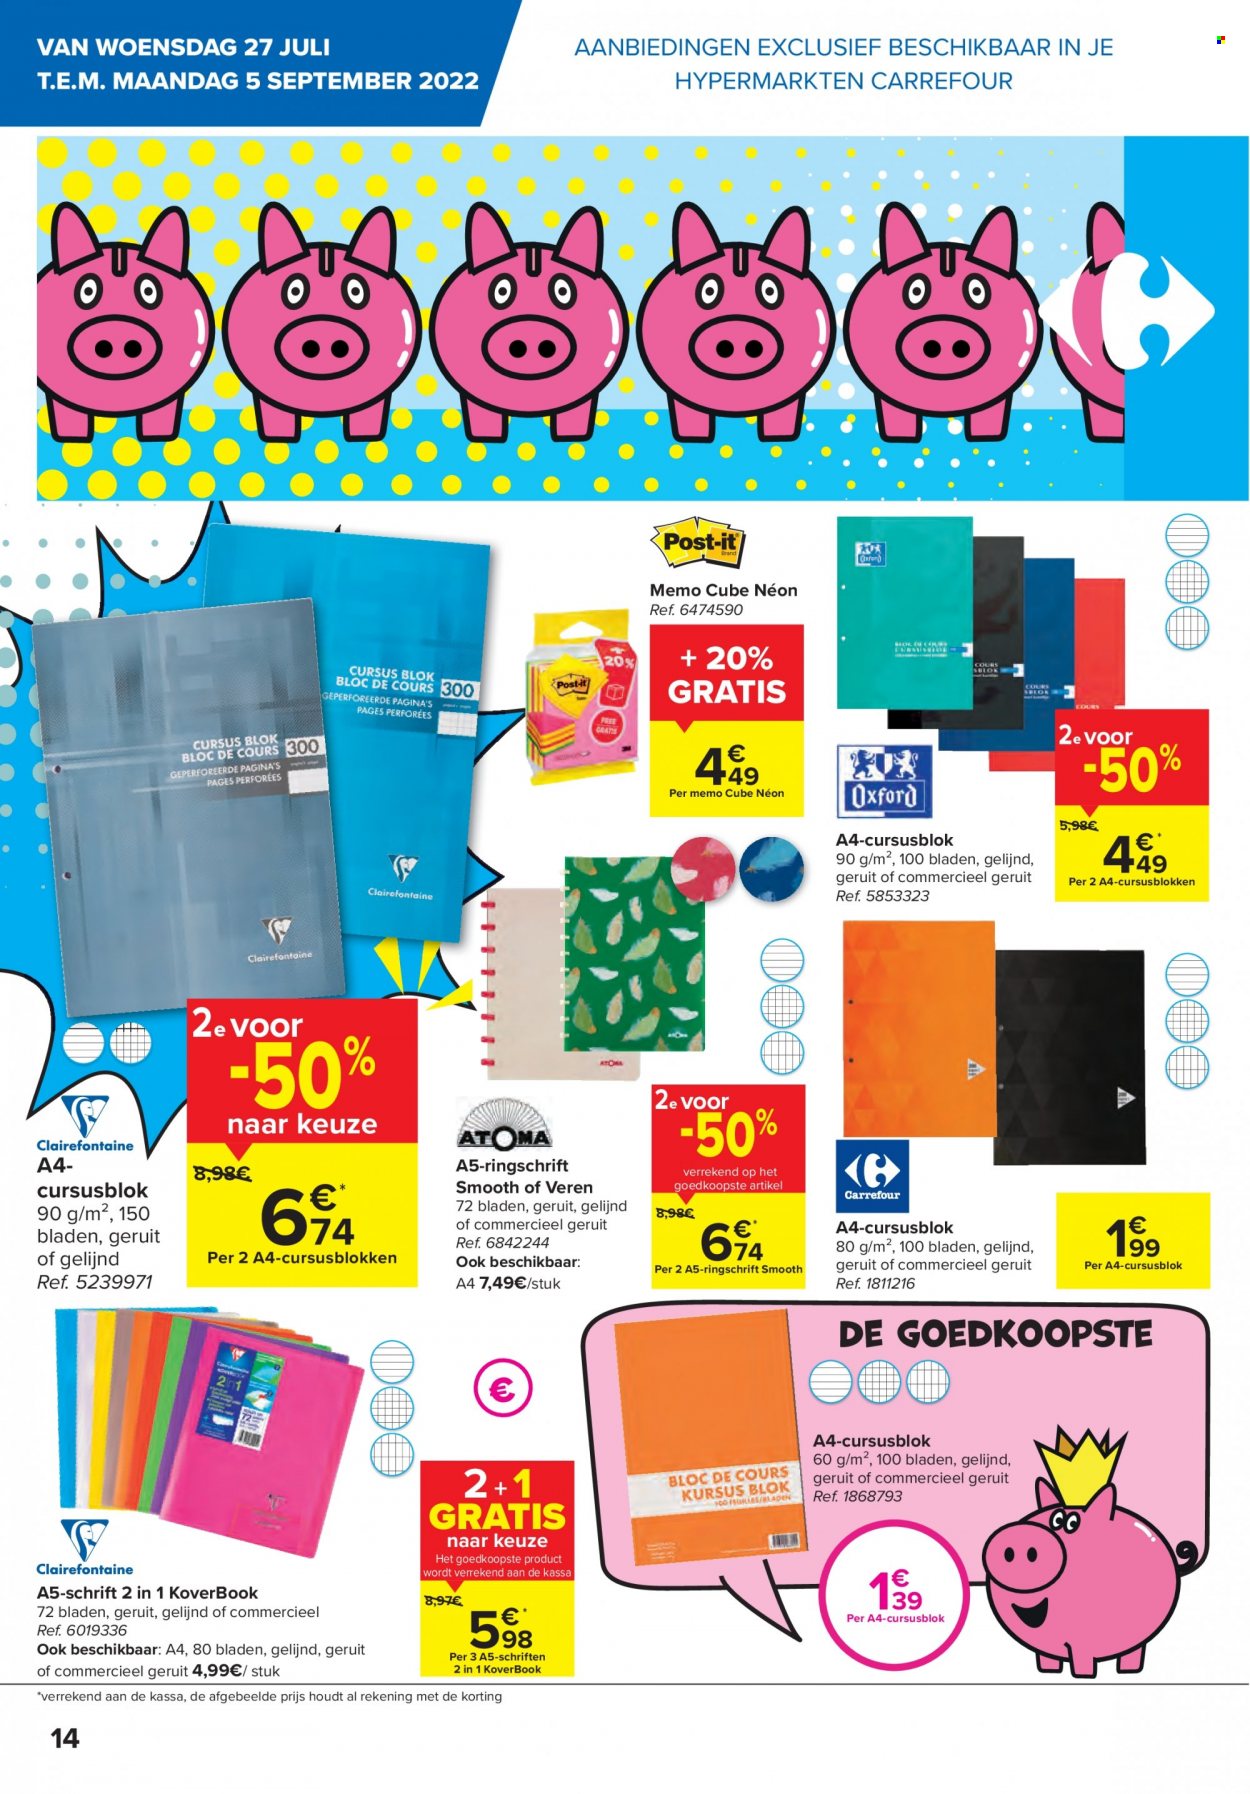 Catalogue Carrefour hypermarkt - 27.7.2022 - 5.9.2022. Page 14.